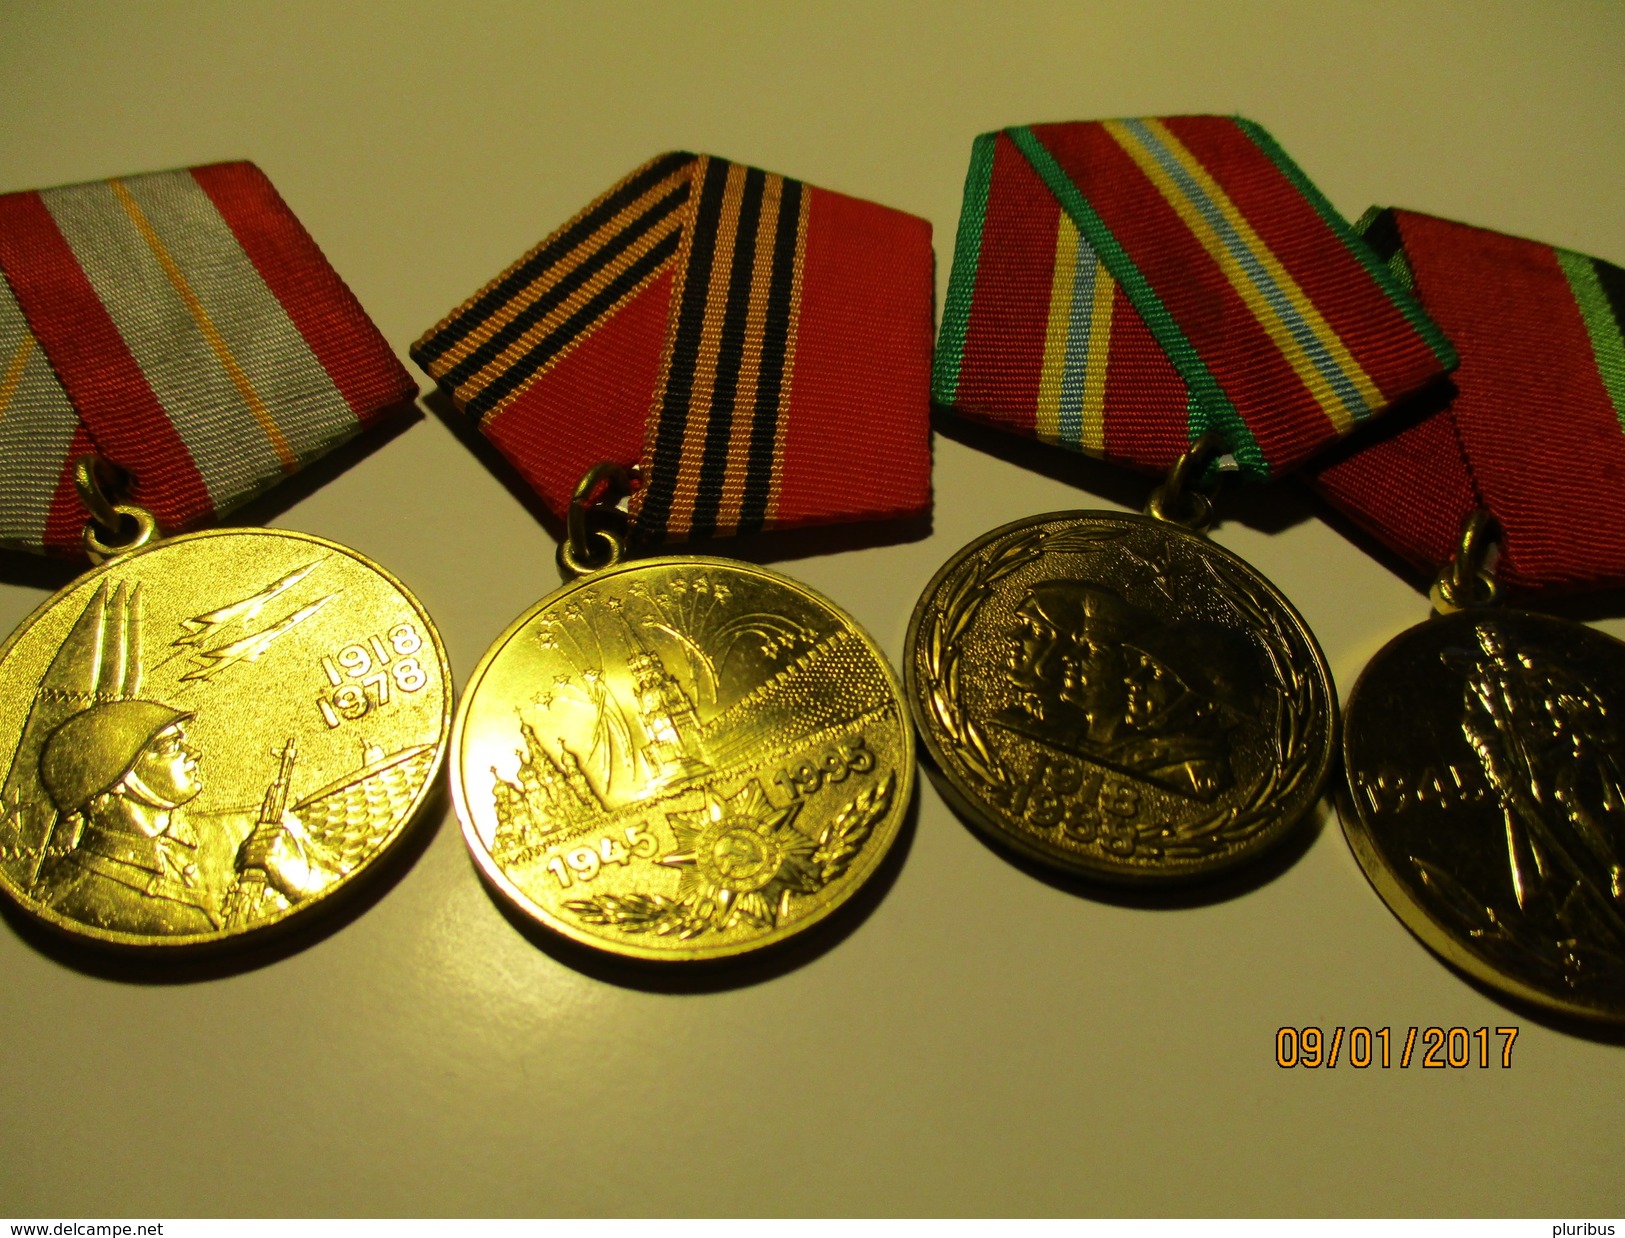 USSR RUSSIA SET OF 9  MEDALS TO WOMAN WWII VETERAN .0 - Russia